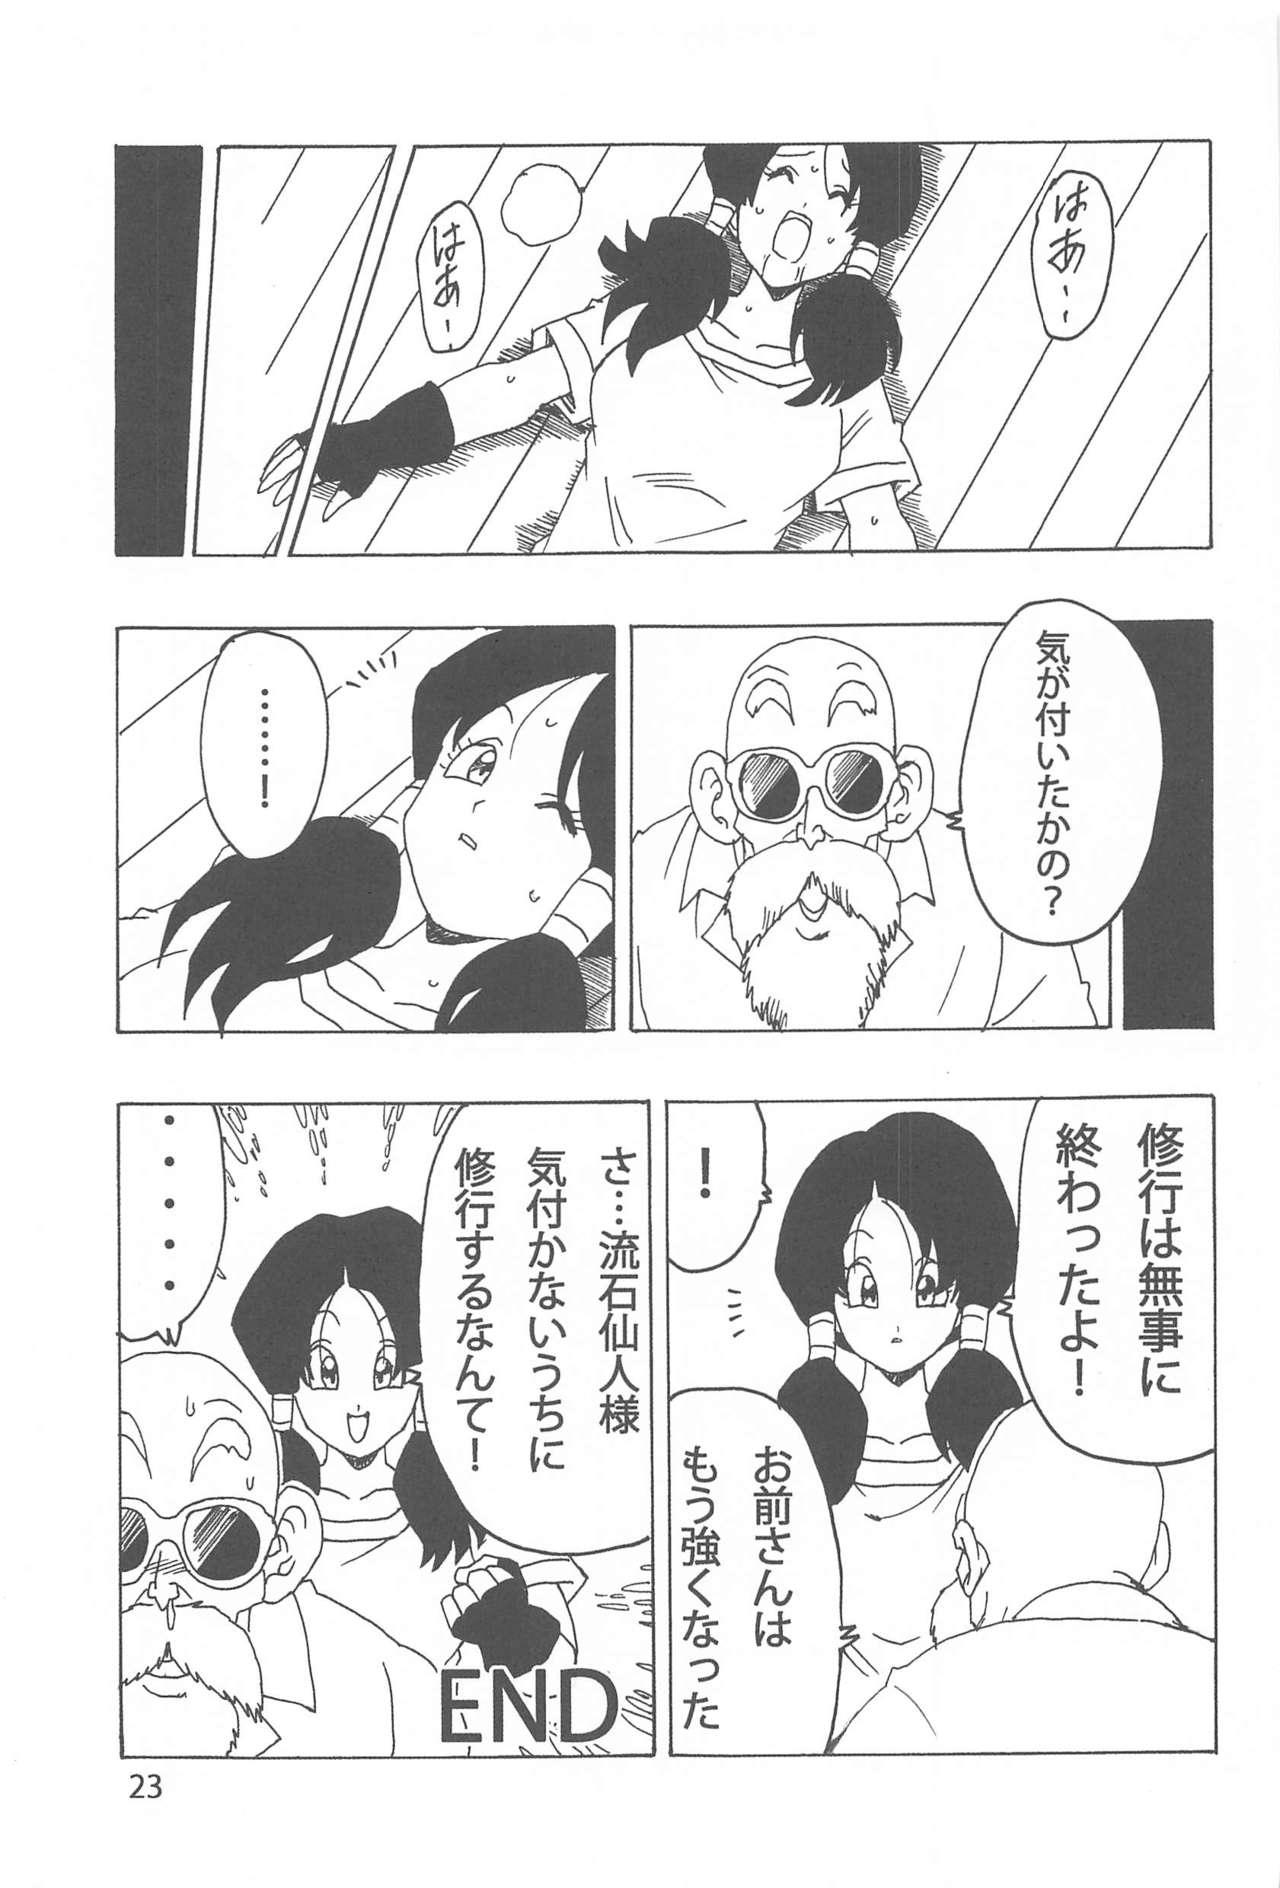 Videl LOVE Page 24 Of 26 dragon ball z hentai haven, Videl LOVE Page 24 Of ...